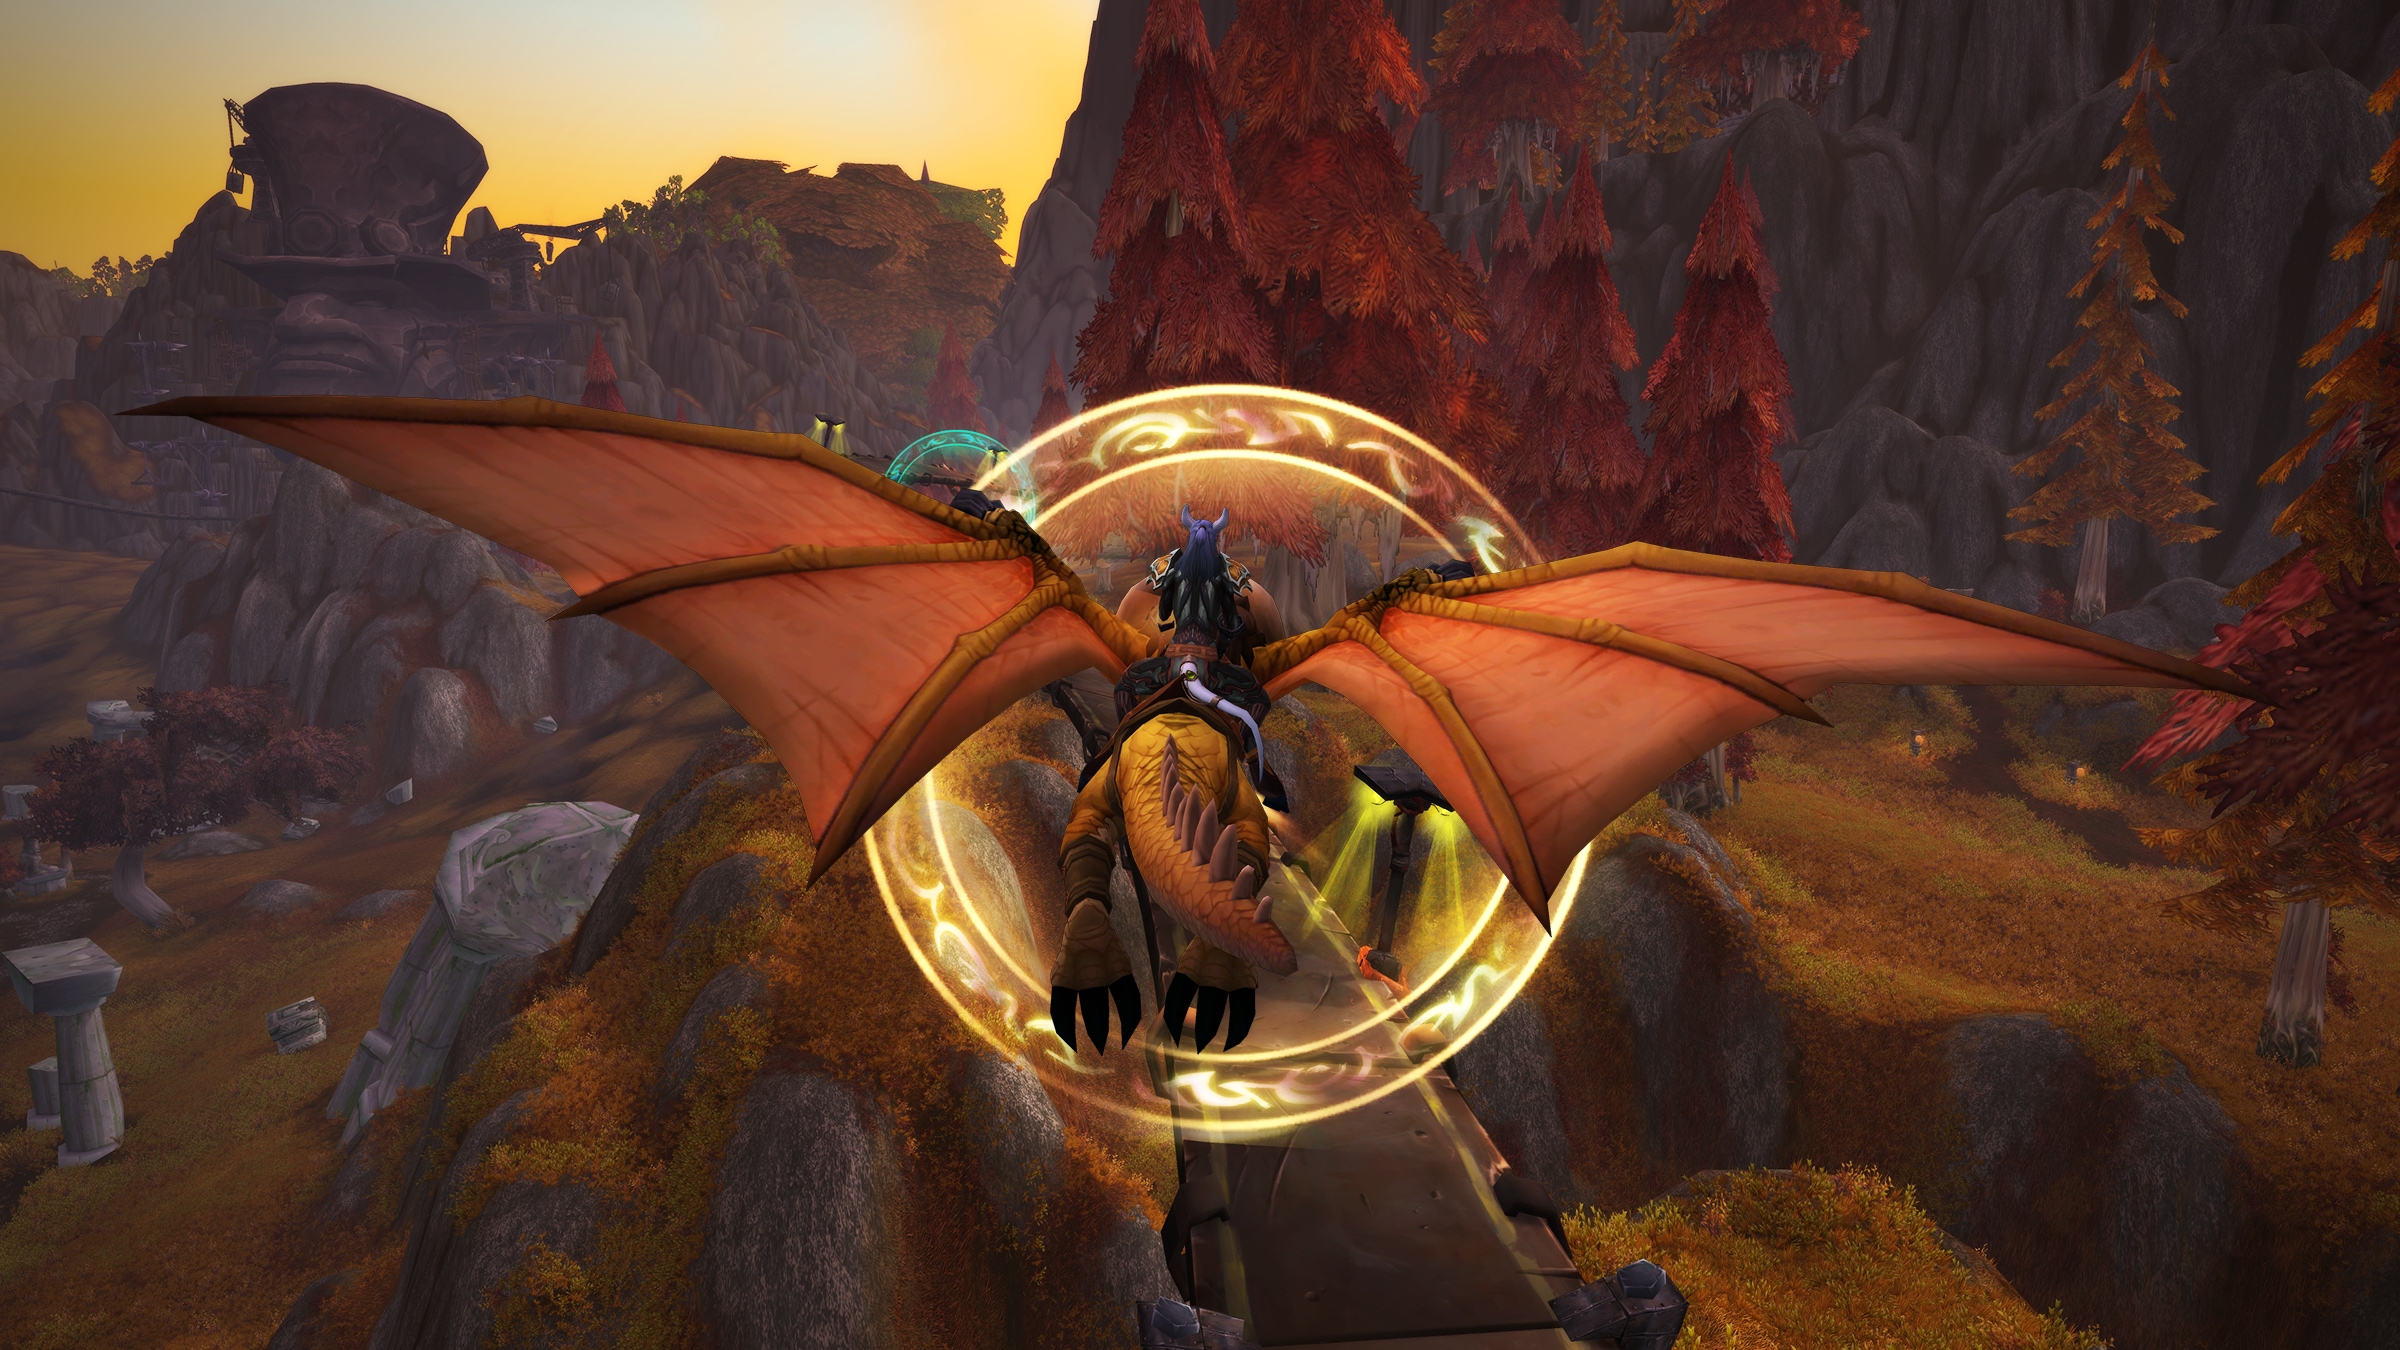 [UPDATED AUGUST 28] Prep Your Dragons and Mount Up for Kalimdor Cup